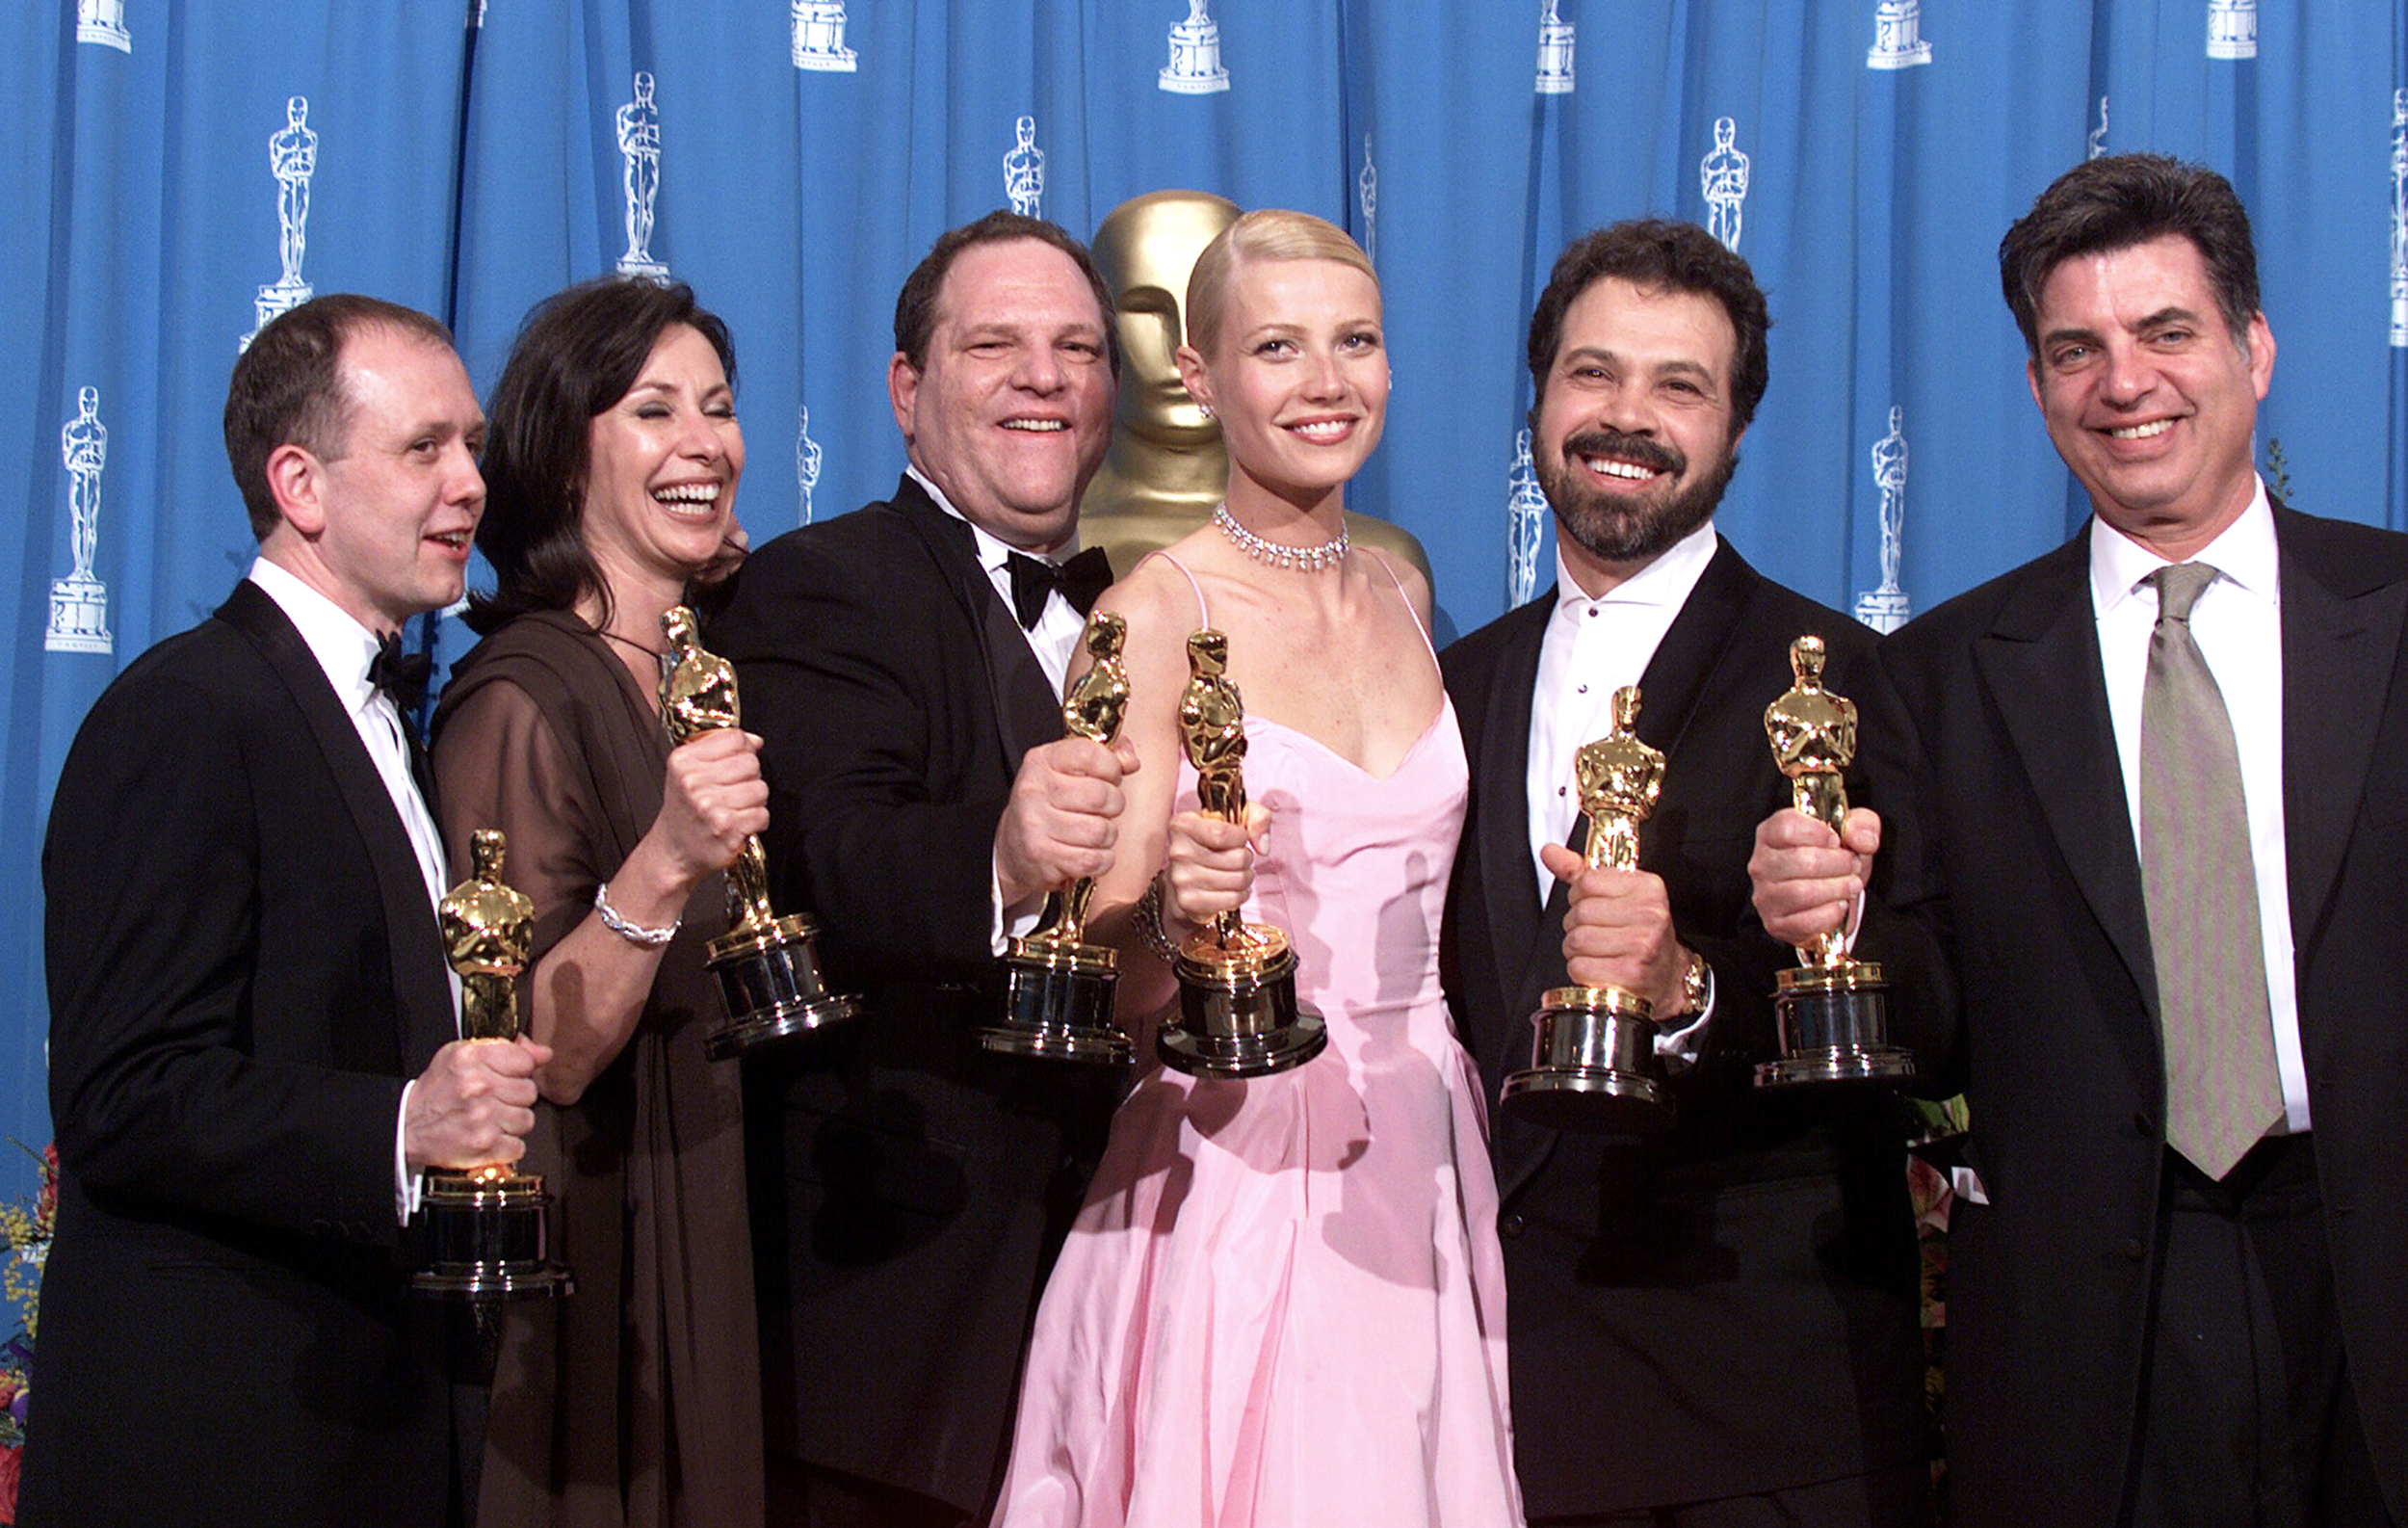 PHOTO: "Shakespeare in Love" Best Actress winner Gwyneth Paltrow (center) is joined by Harvey Weinstein (center left)  and other stars as they celebrated their win of Best Picture at the 1999 Academy Awards in Hollywood, Calif., on March 21, 1999.